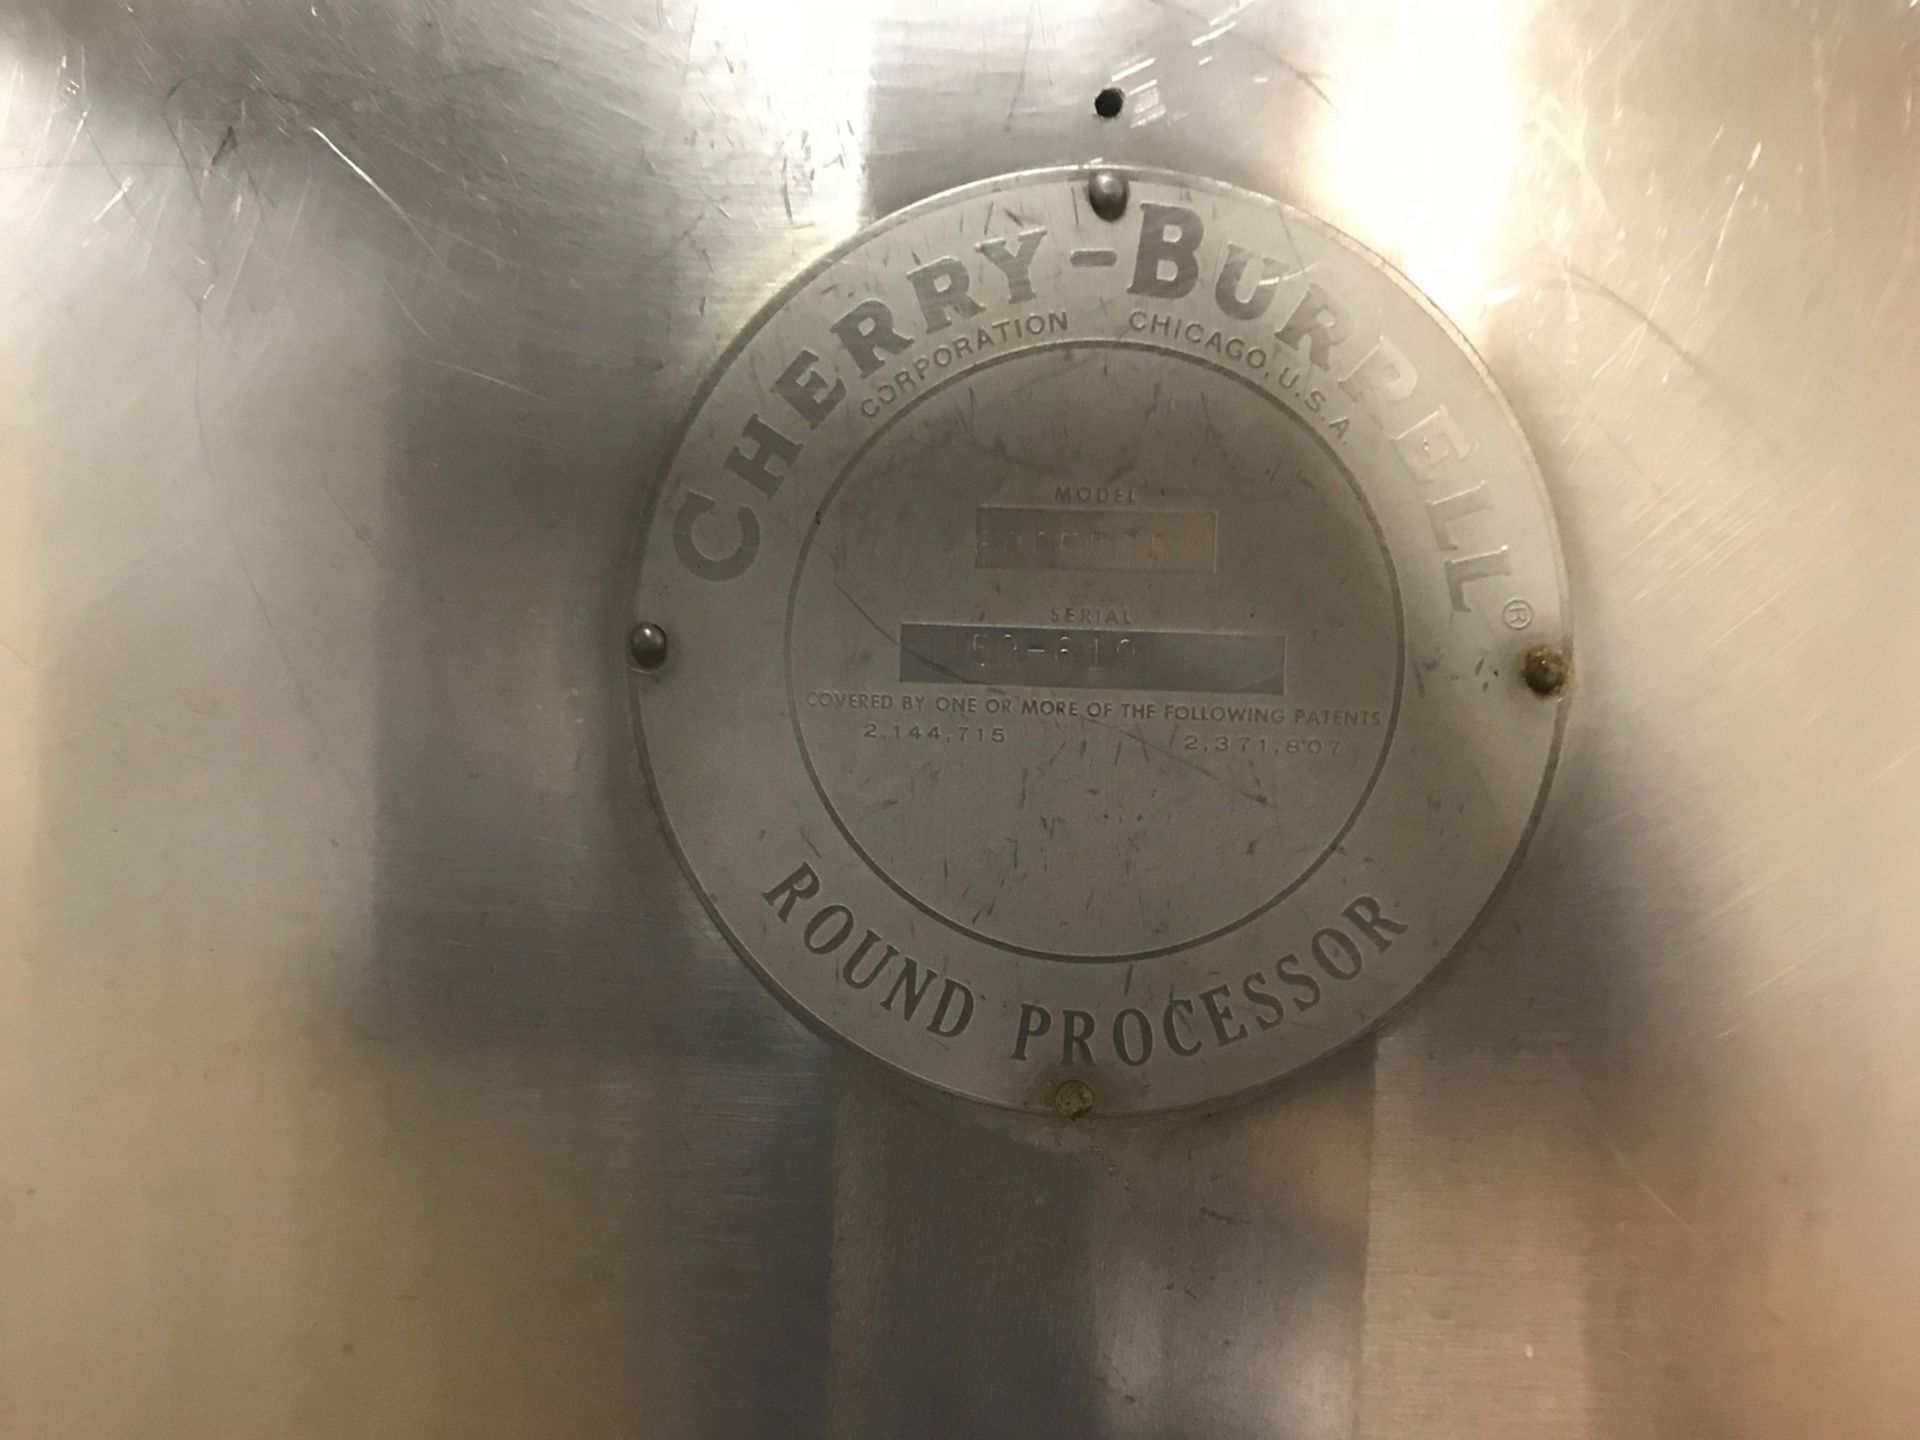 Cherry Burrell Model 600 EPTD Processor, Wide Bottom Sweep Agitation, Pressure Wall, Dome Top, - Image 2 of 3